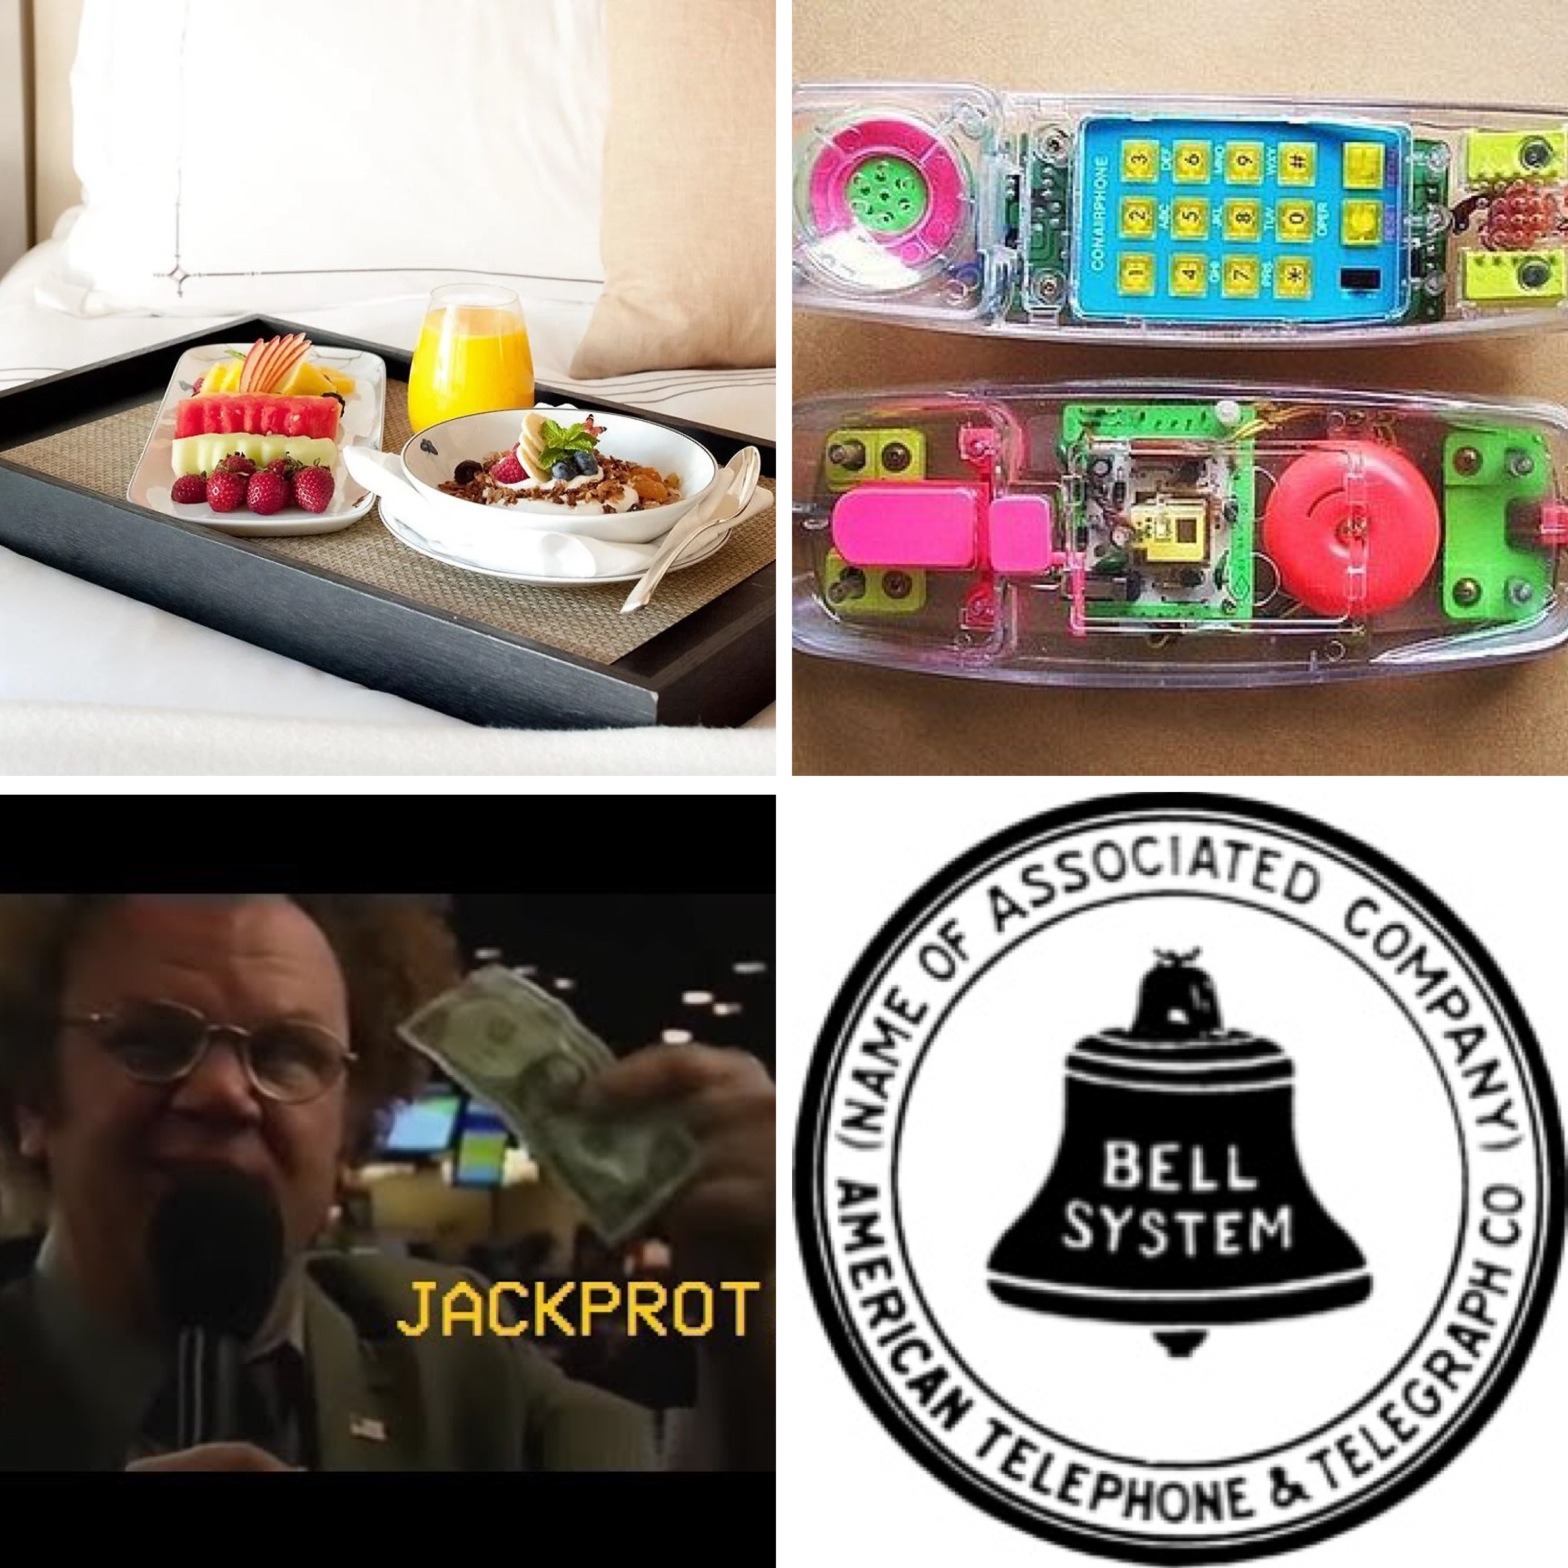 Breakfast in bed; a see through, light up '90s phone; Steve Brule saying "Jackprot;" The Bell System phone company.